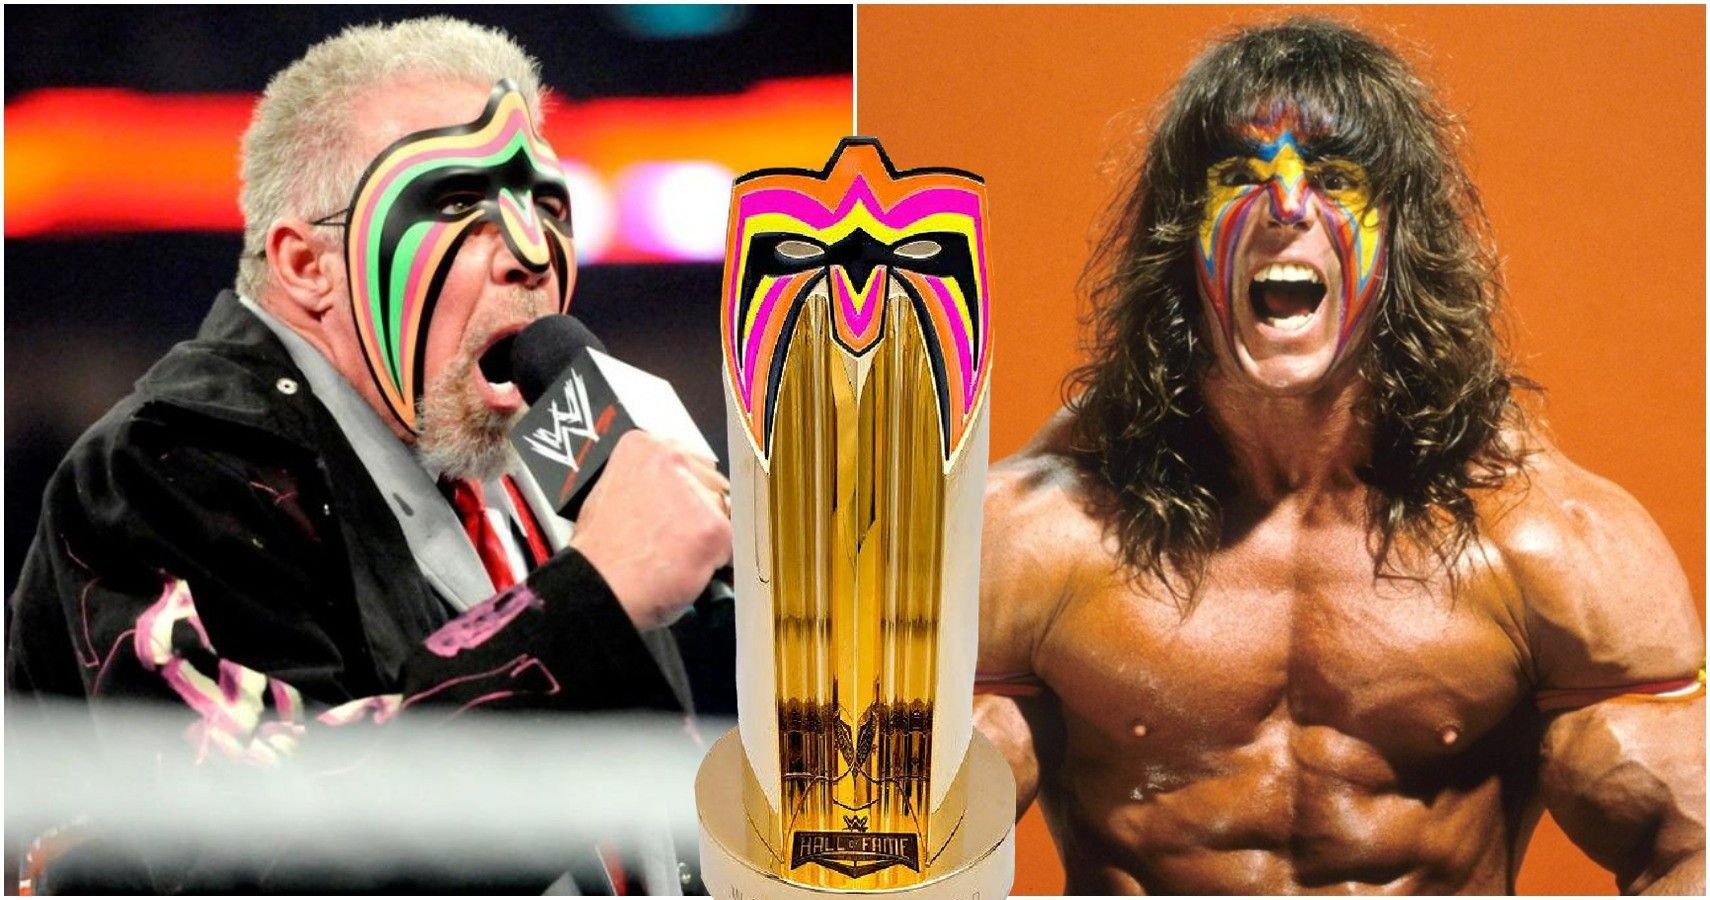 Ultimate Whitewashing: Fans Should Not Accept WWE's Ultimate Warrior Narrative